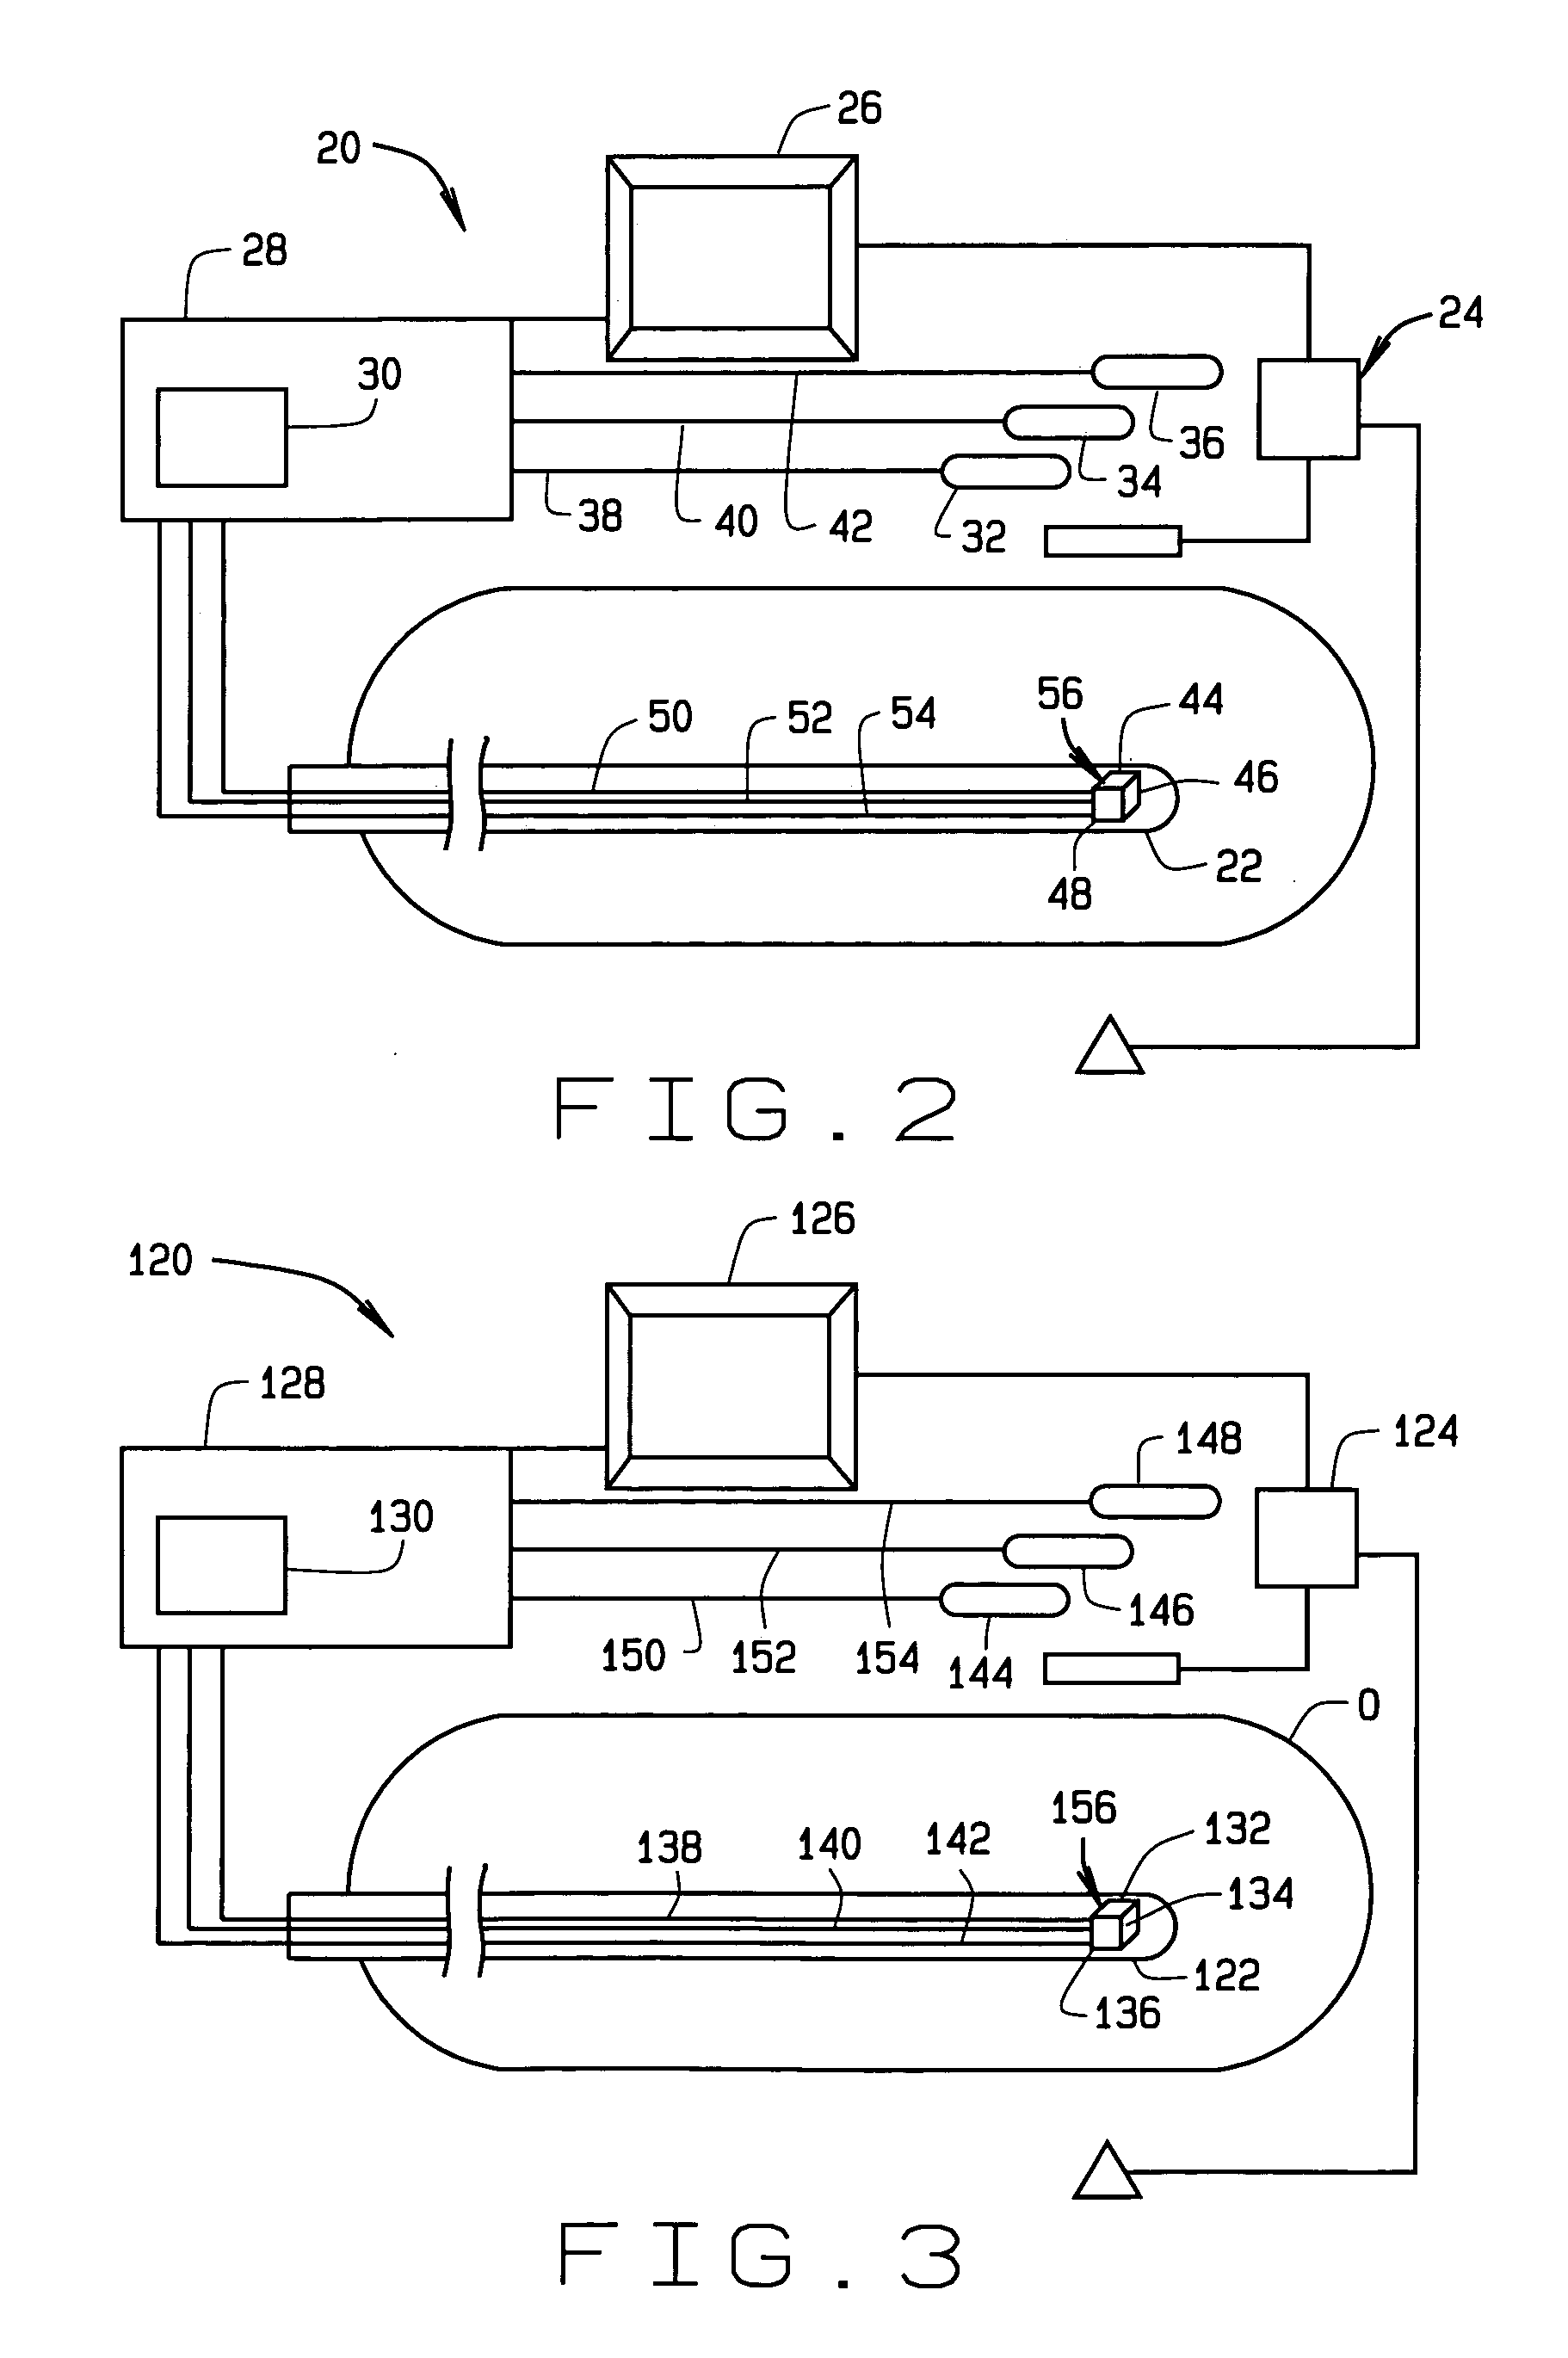 Method of localizing medical devices